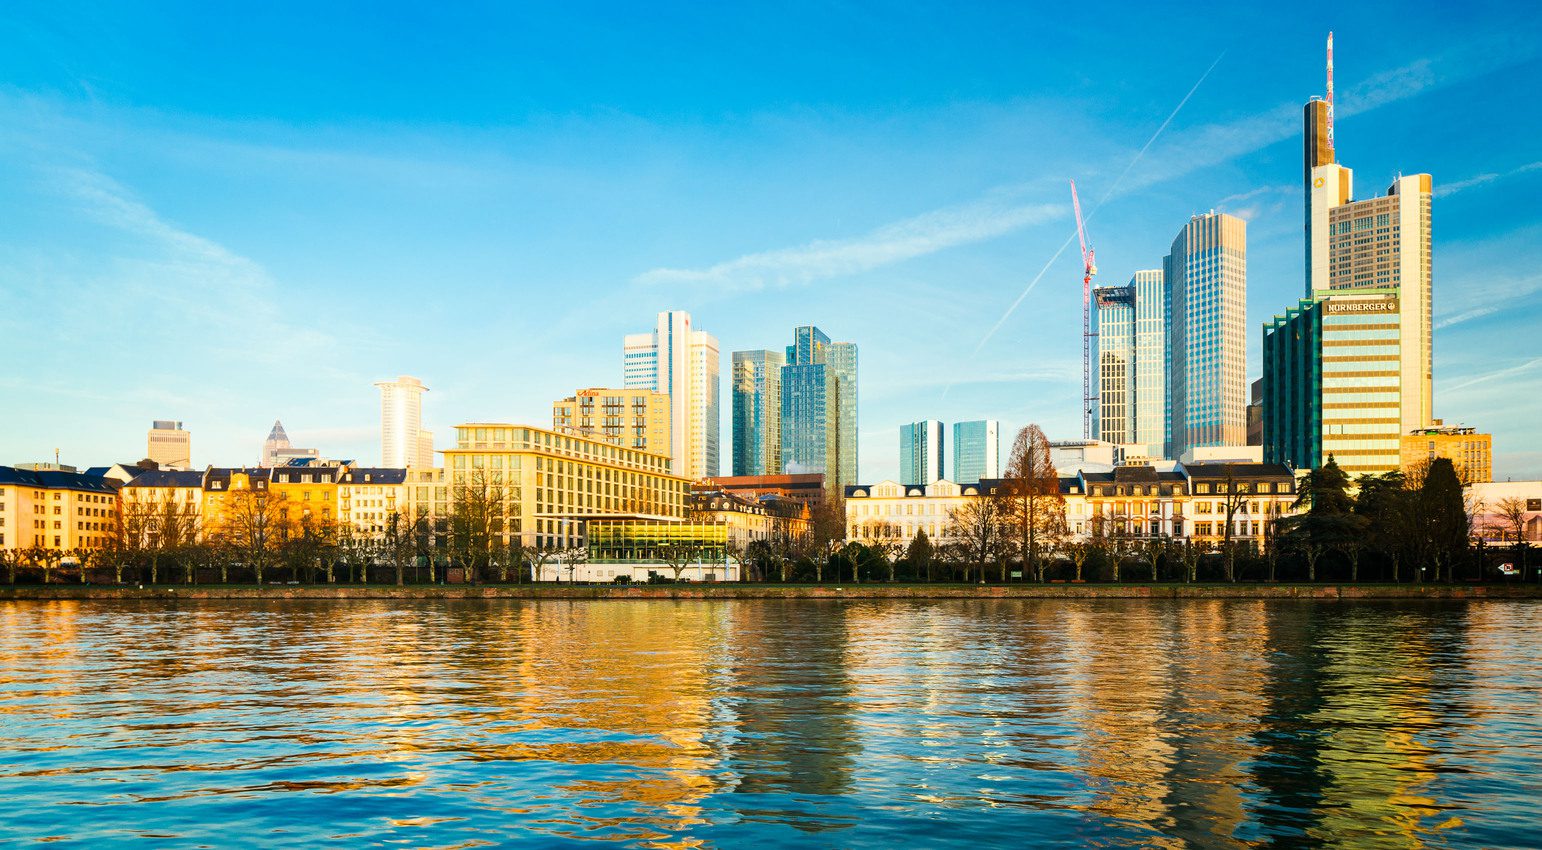 Early morning view of central Frankfurt am Main, Germany, from across the river. FF008